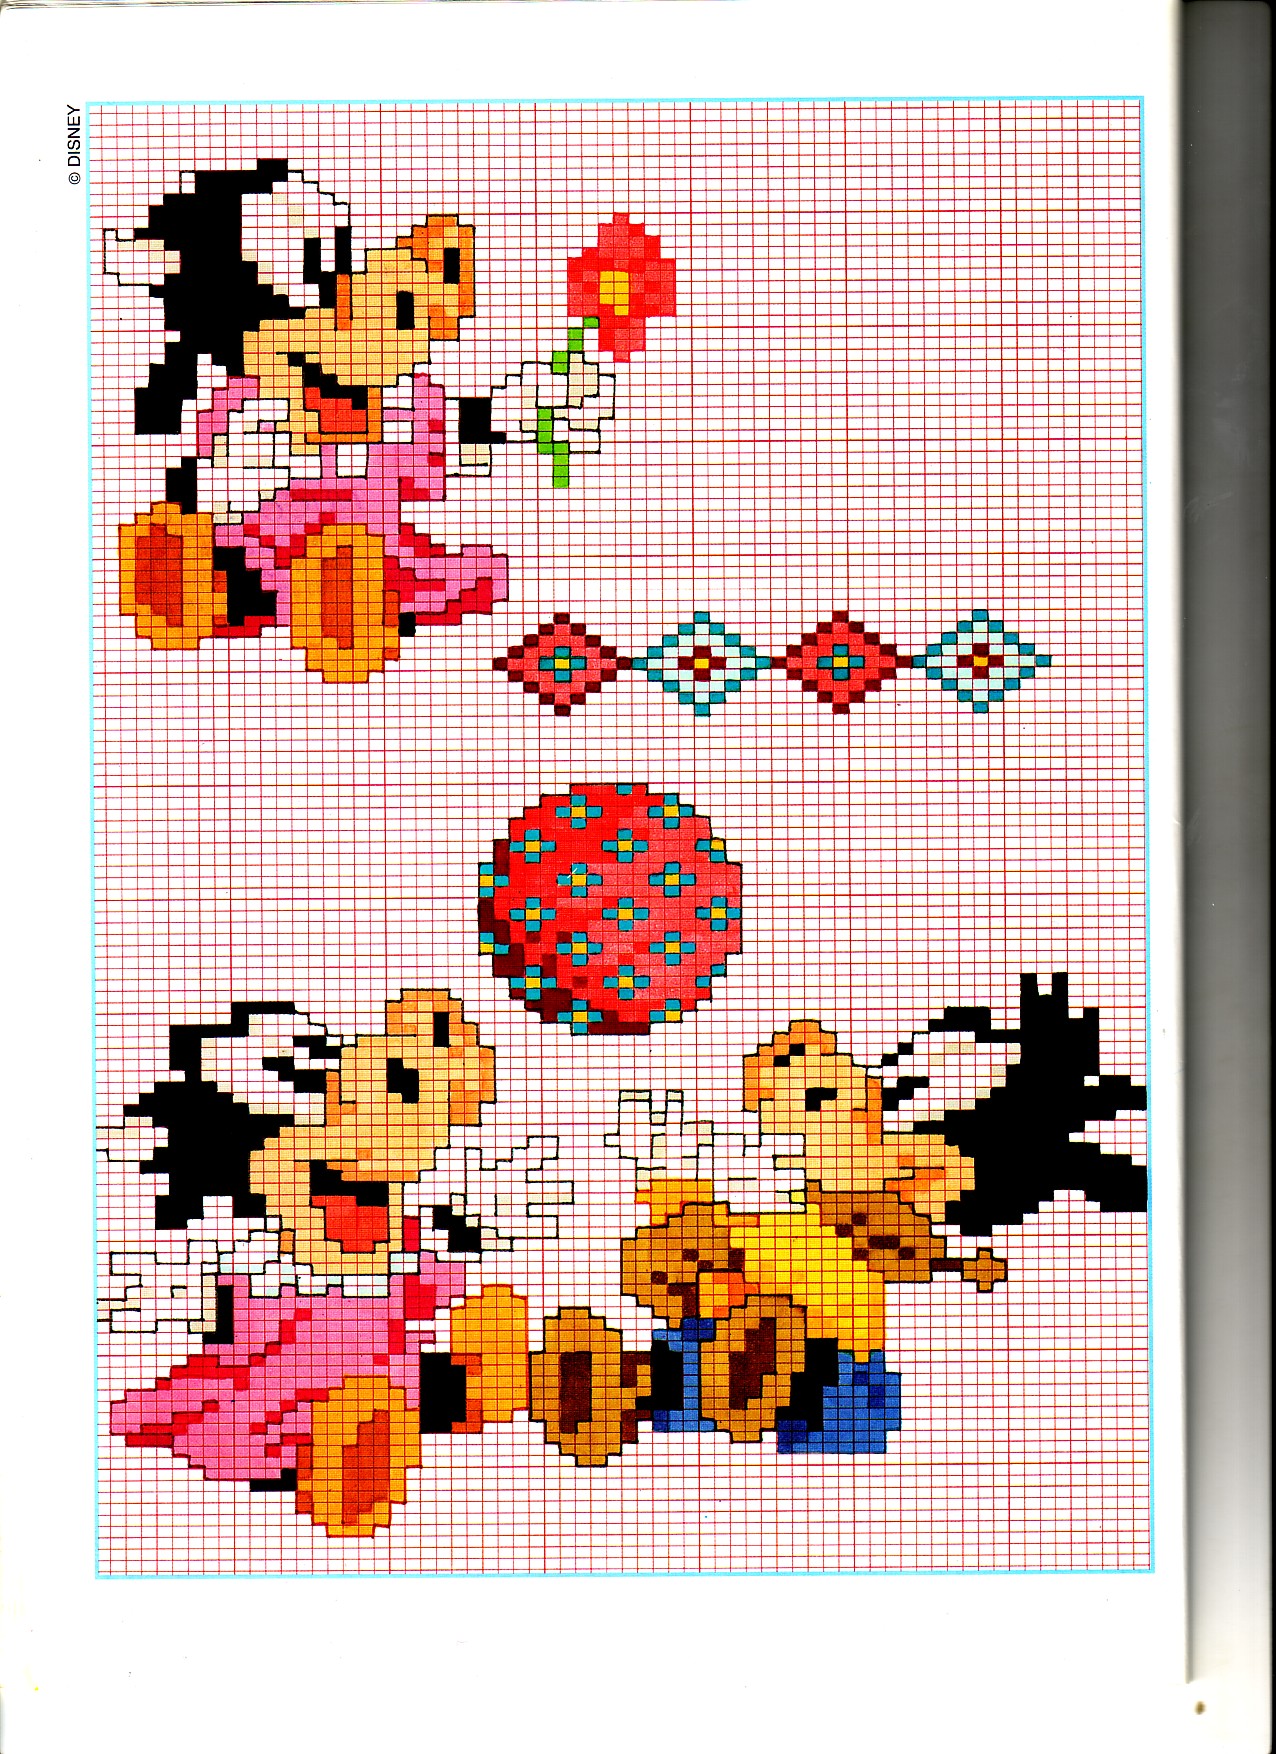 Baby Clarabelle Cow and Horace Horsecollar cross stitch patterns